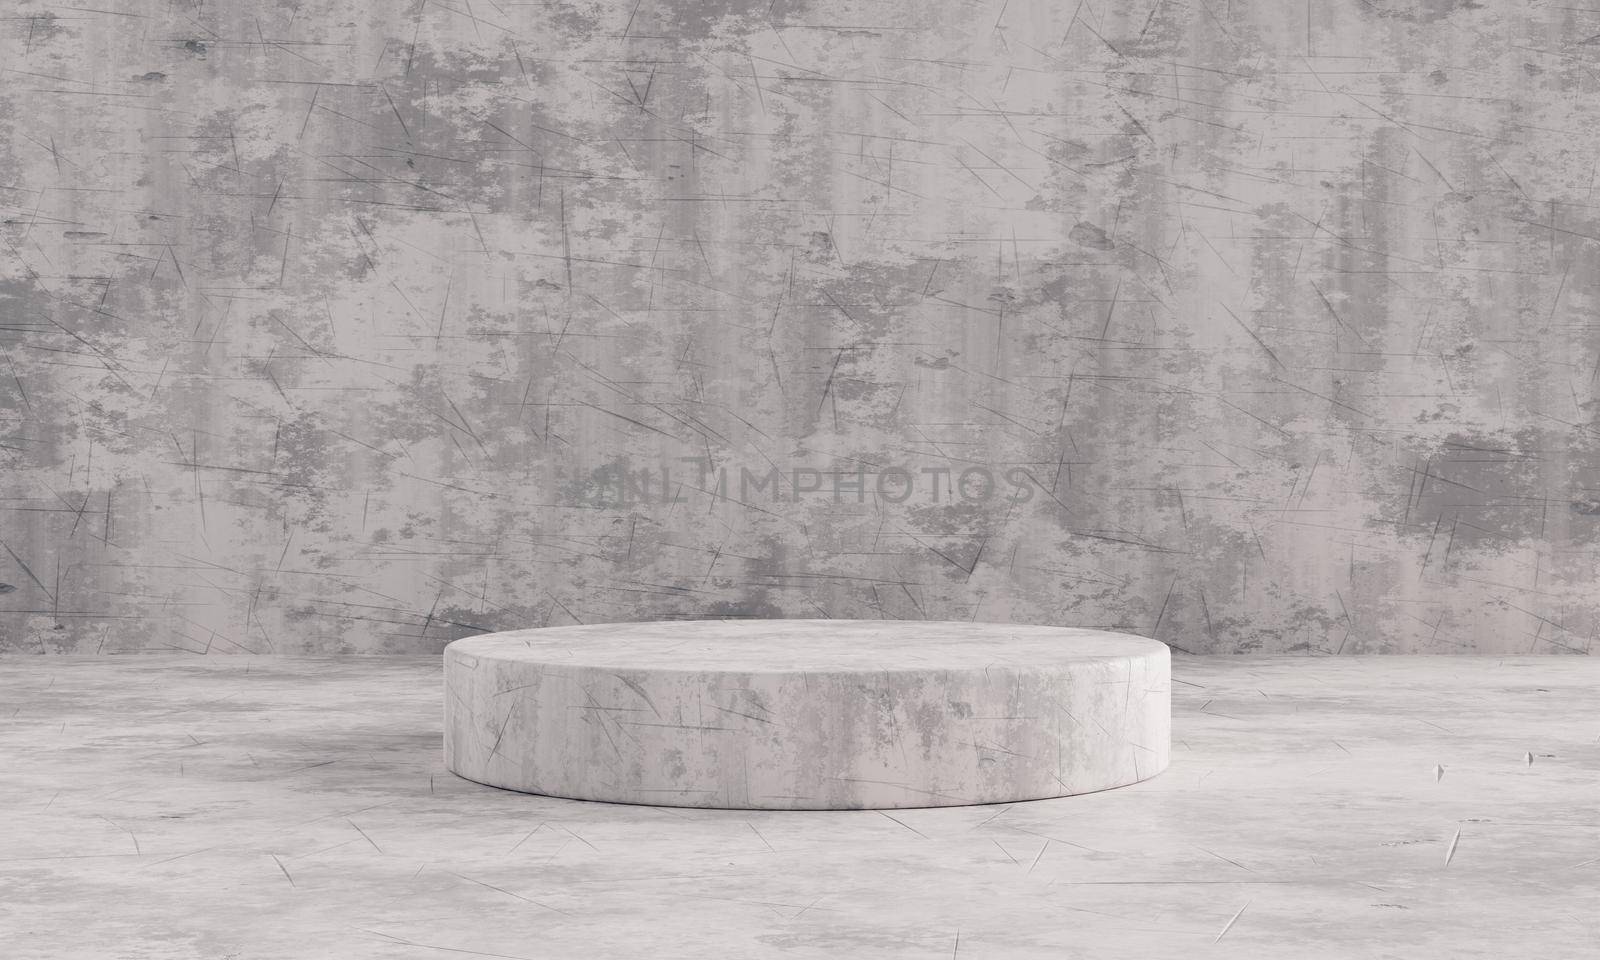 Black and white stone pattern single product stage podium for presentation mockup template. Showroom and abstract interior concept. Geometry exhibition stage mockup concept. 3D illustration rendering